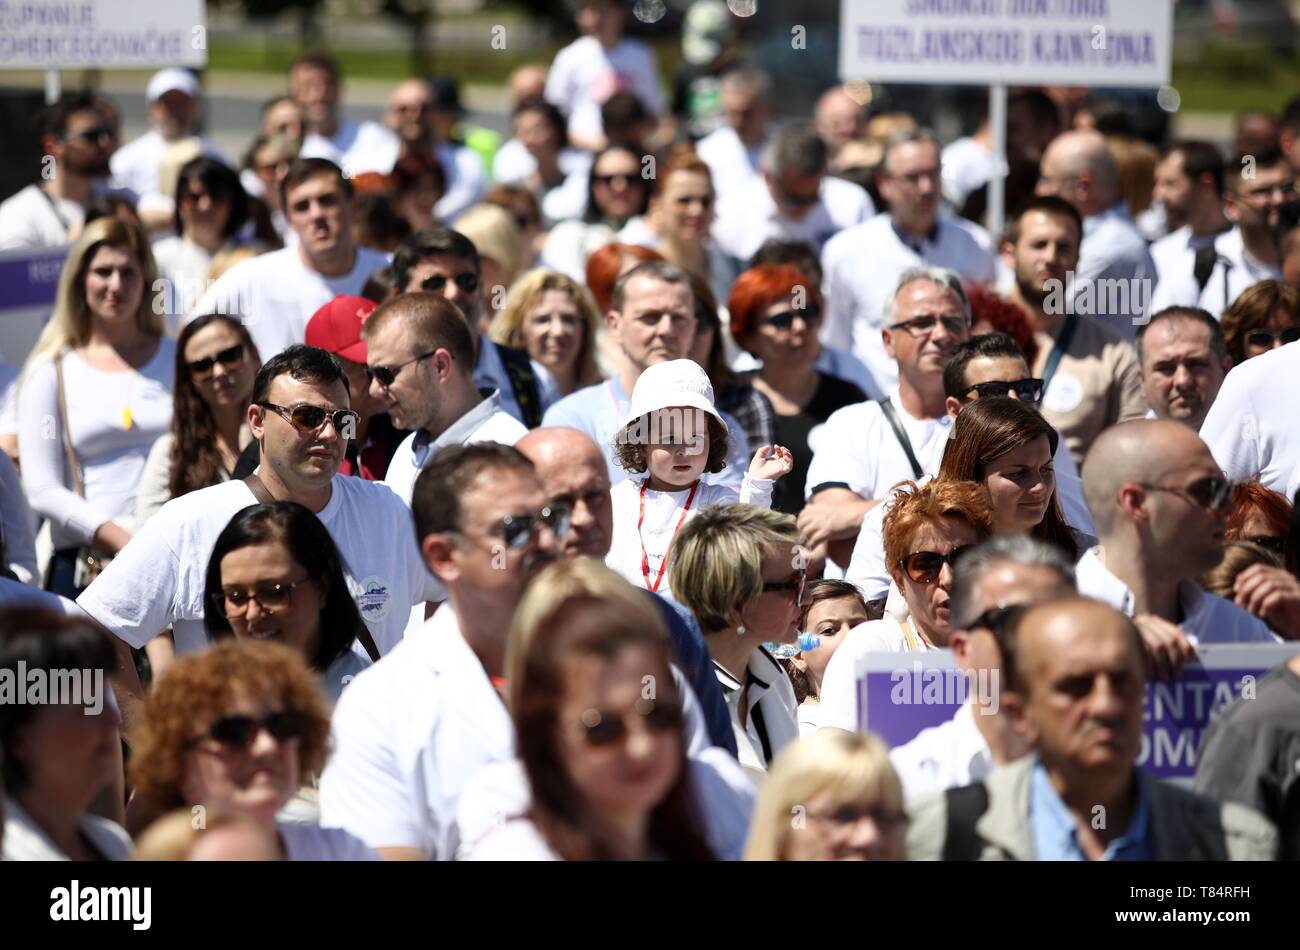 Sarajevo, Bosnia and Herzegovina. 11th May, 2019. Doctors take part in a protest rally in Sarajevo, Bosnia and Herzegovina, on May 11, 2019. Around 1,500 to 2,000 doctors from across Bosnia and Herzegovina protested in front of the parliament demanding the change of a law which will resolve their working status. Credit: Nedim Grabovica/Xinhua/Alamy Live News Stock Photo